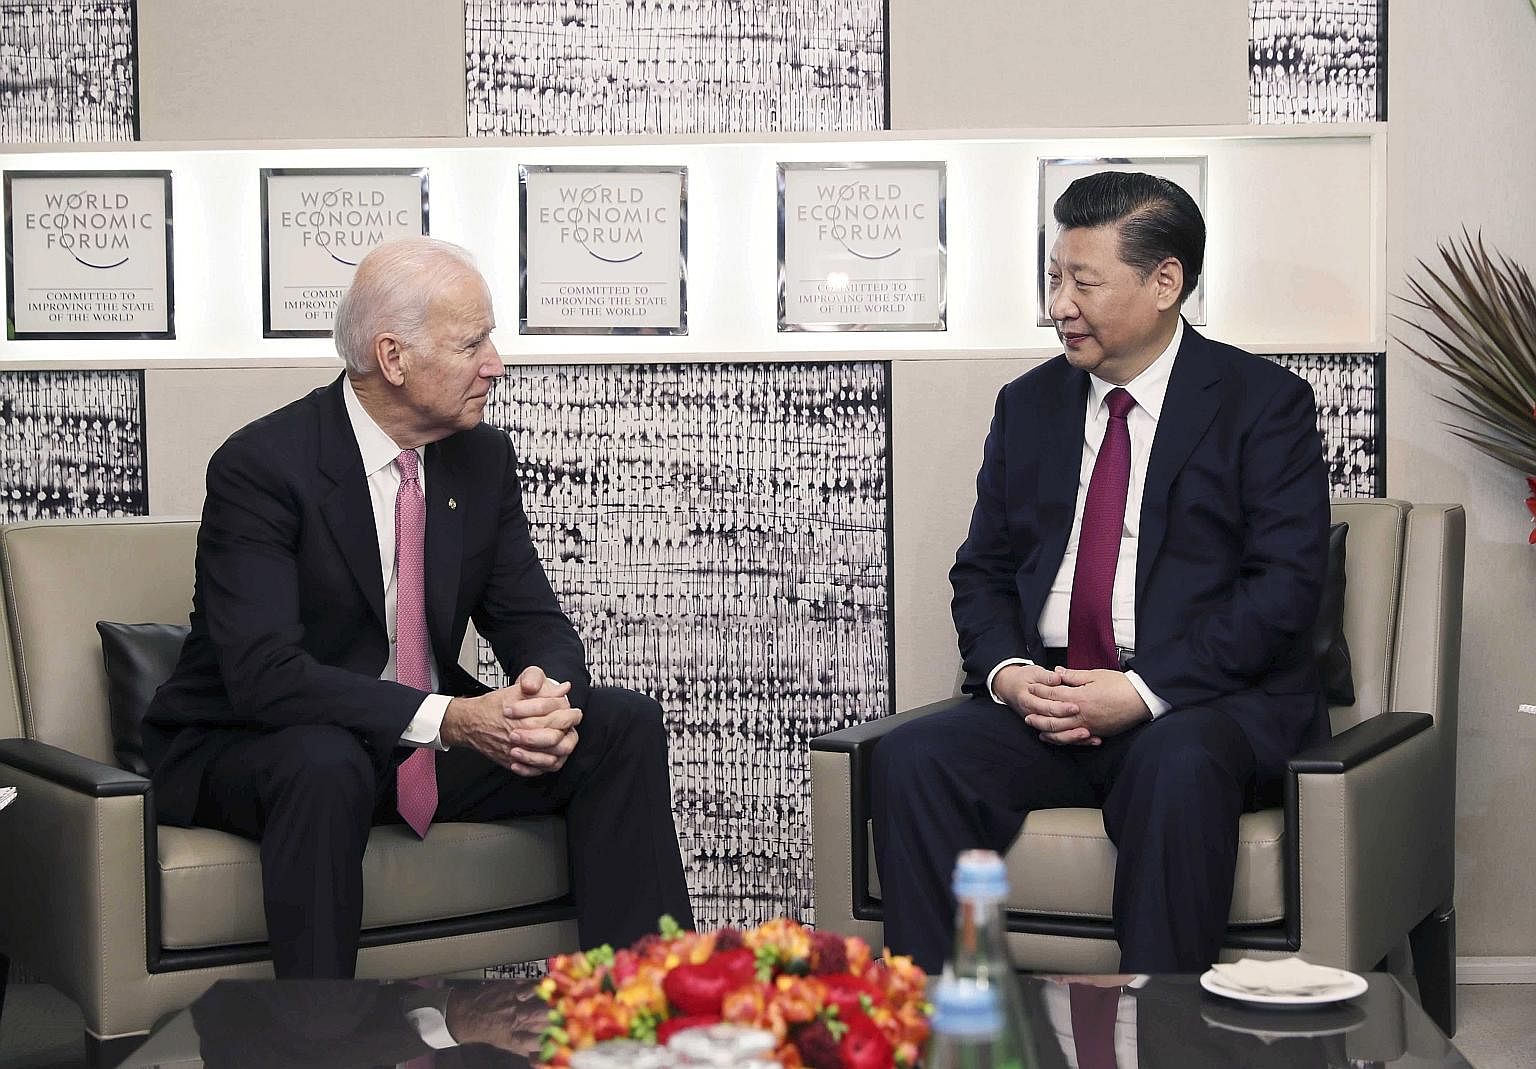 Mr Biden and Mr Xi meeting on the sidelines of the WEF in Davos. Mr Biden chose to deliver his last official speech in Davos, while Mr Xi was the first president from China to address the forum. Both men gave a robust defence of an open, liberal worl